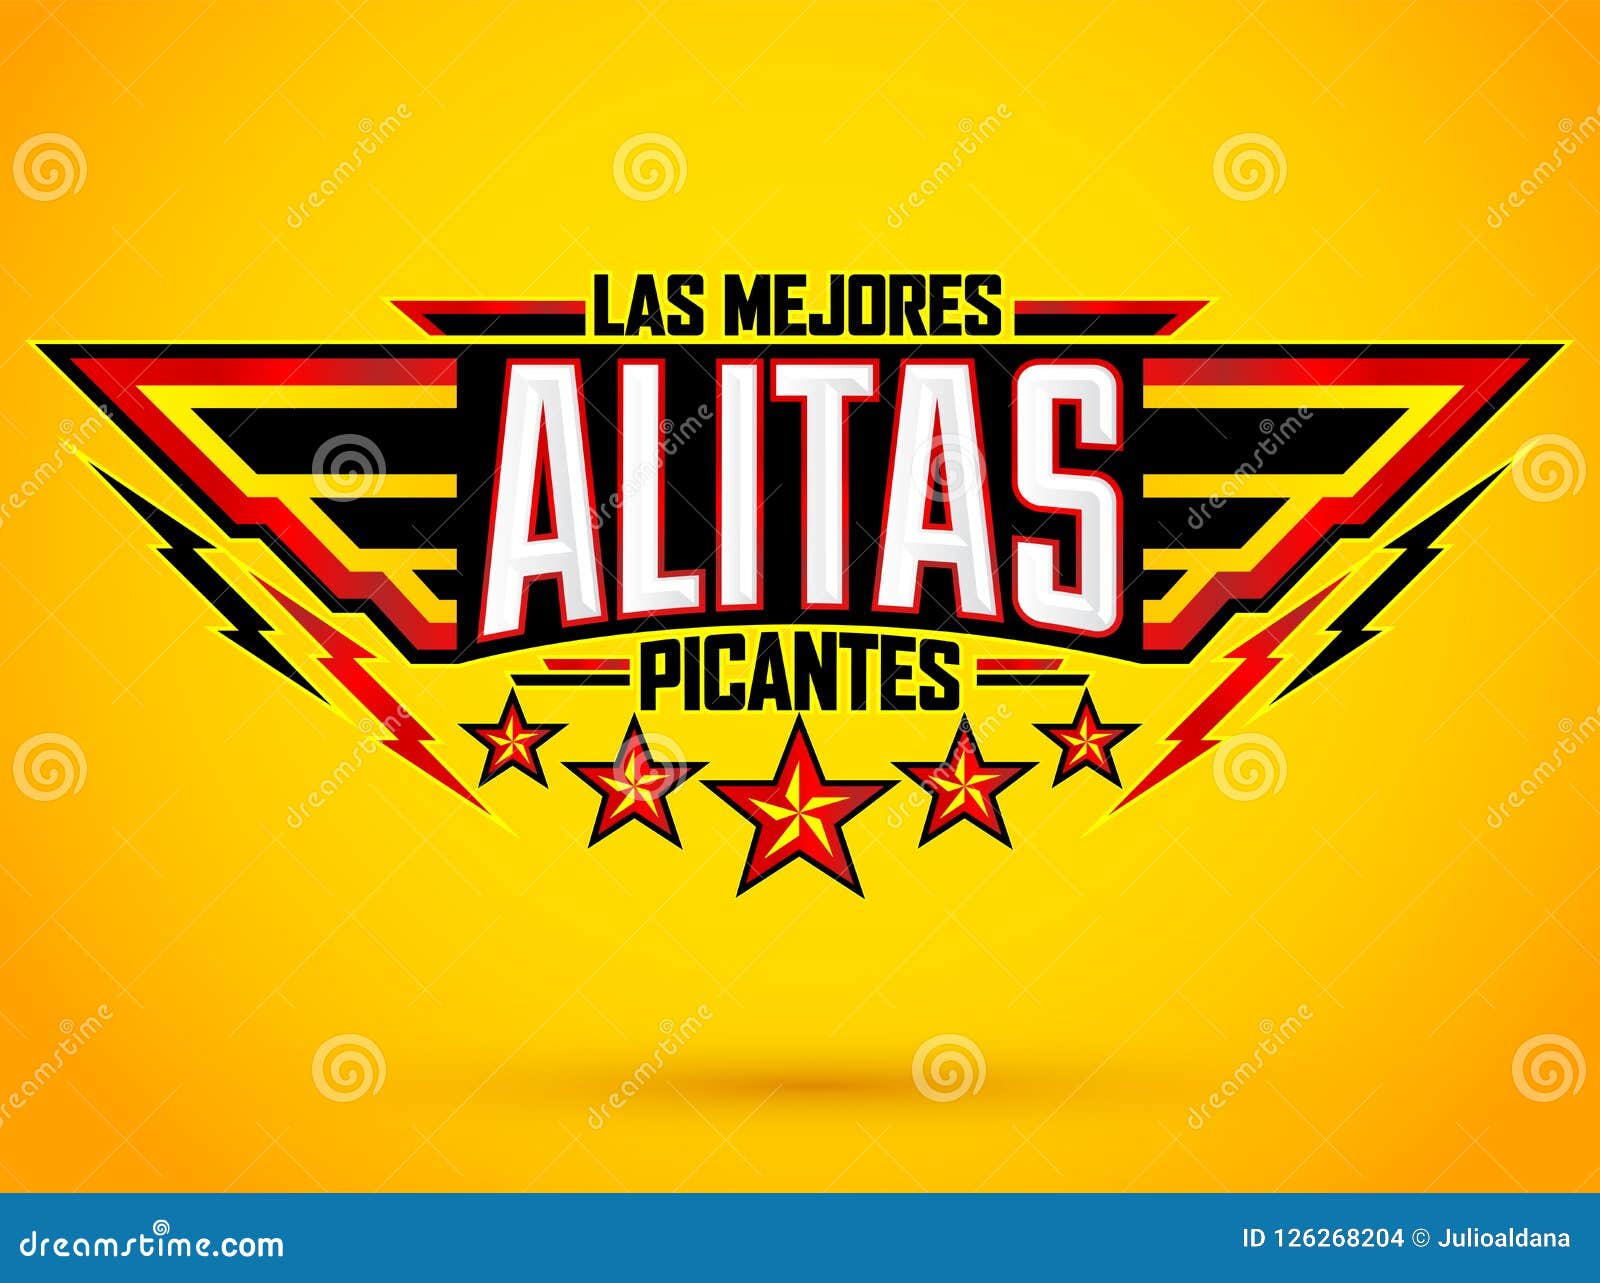 Alitas Picantes Las Mejores, the Best Hot Chicken Wings Spanish Text Stock  Vector - Illustration of meat, fastfood: 126268204